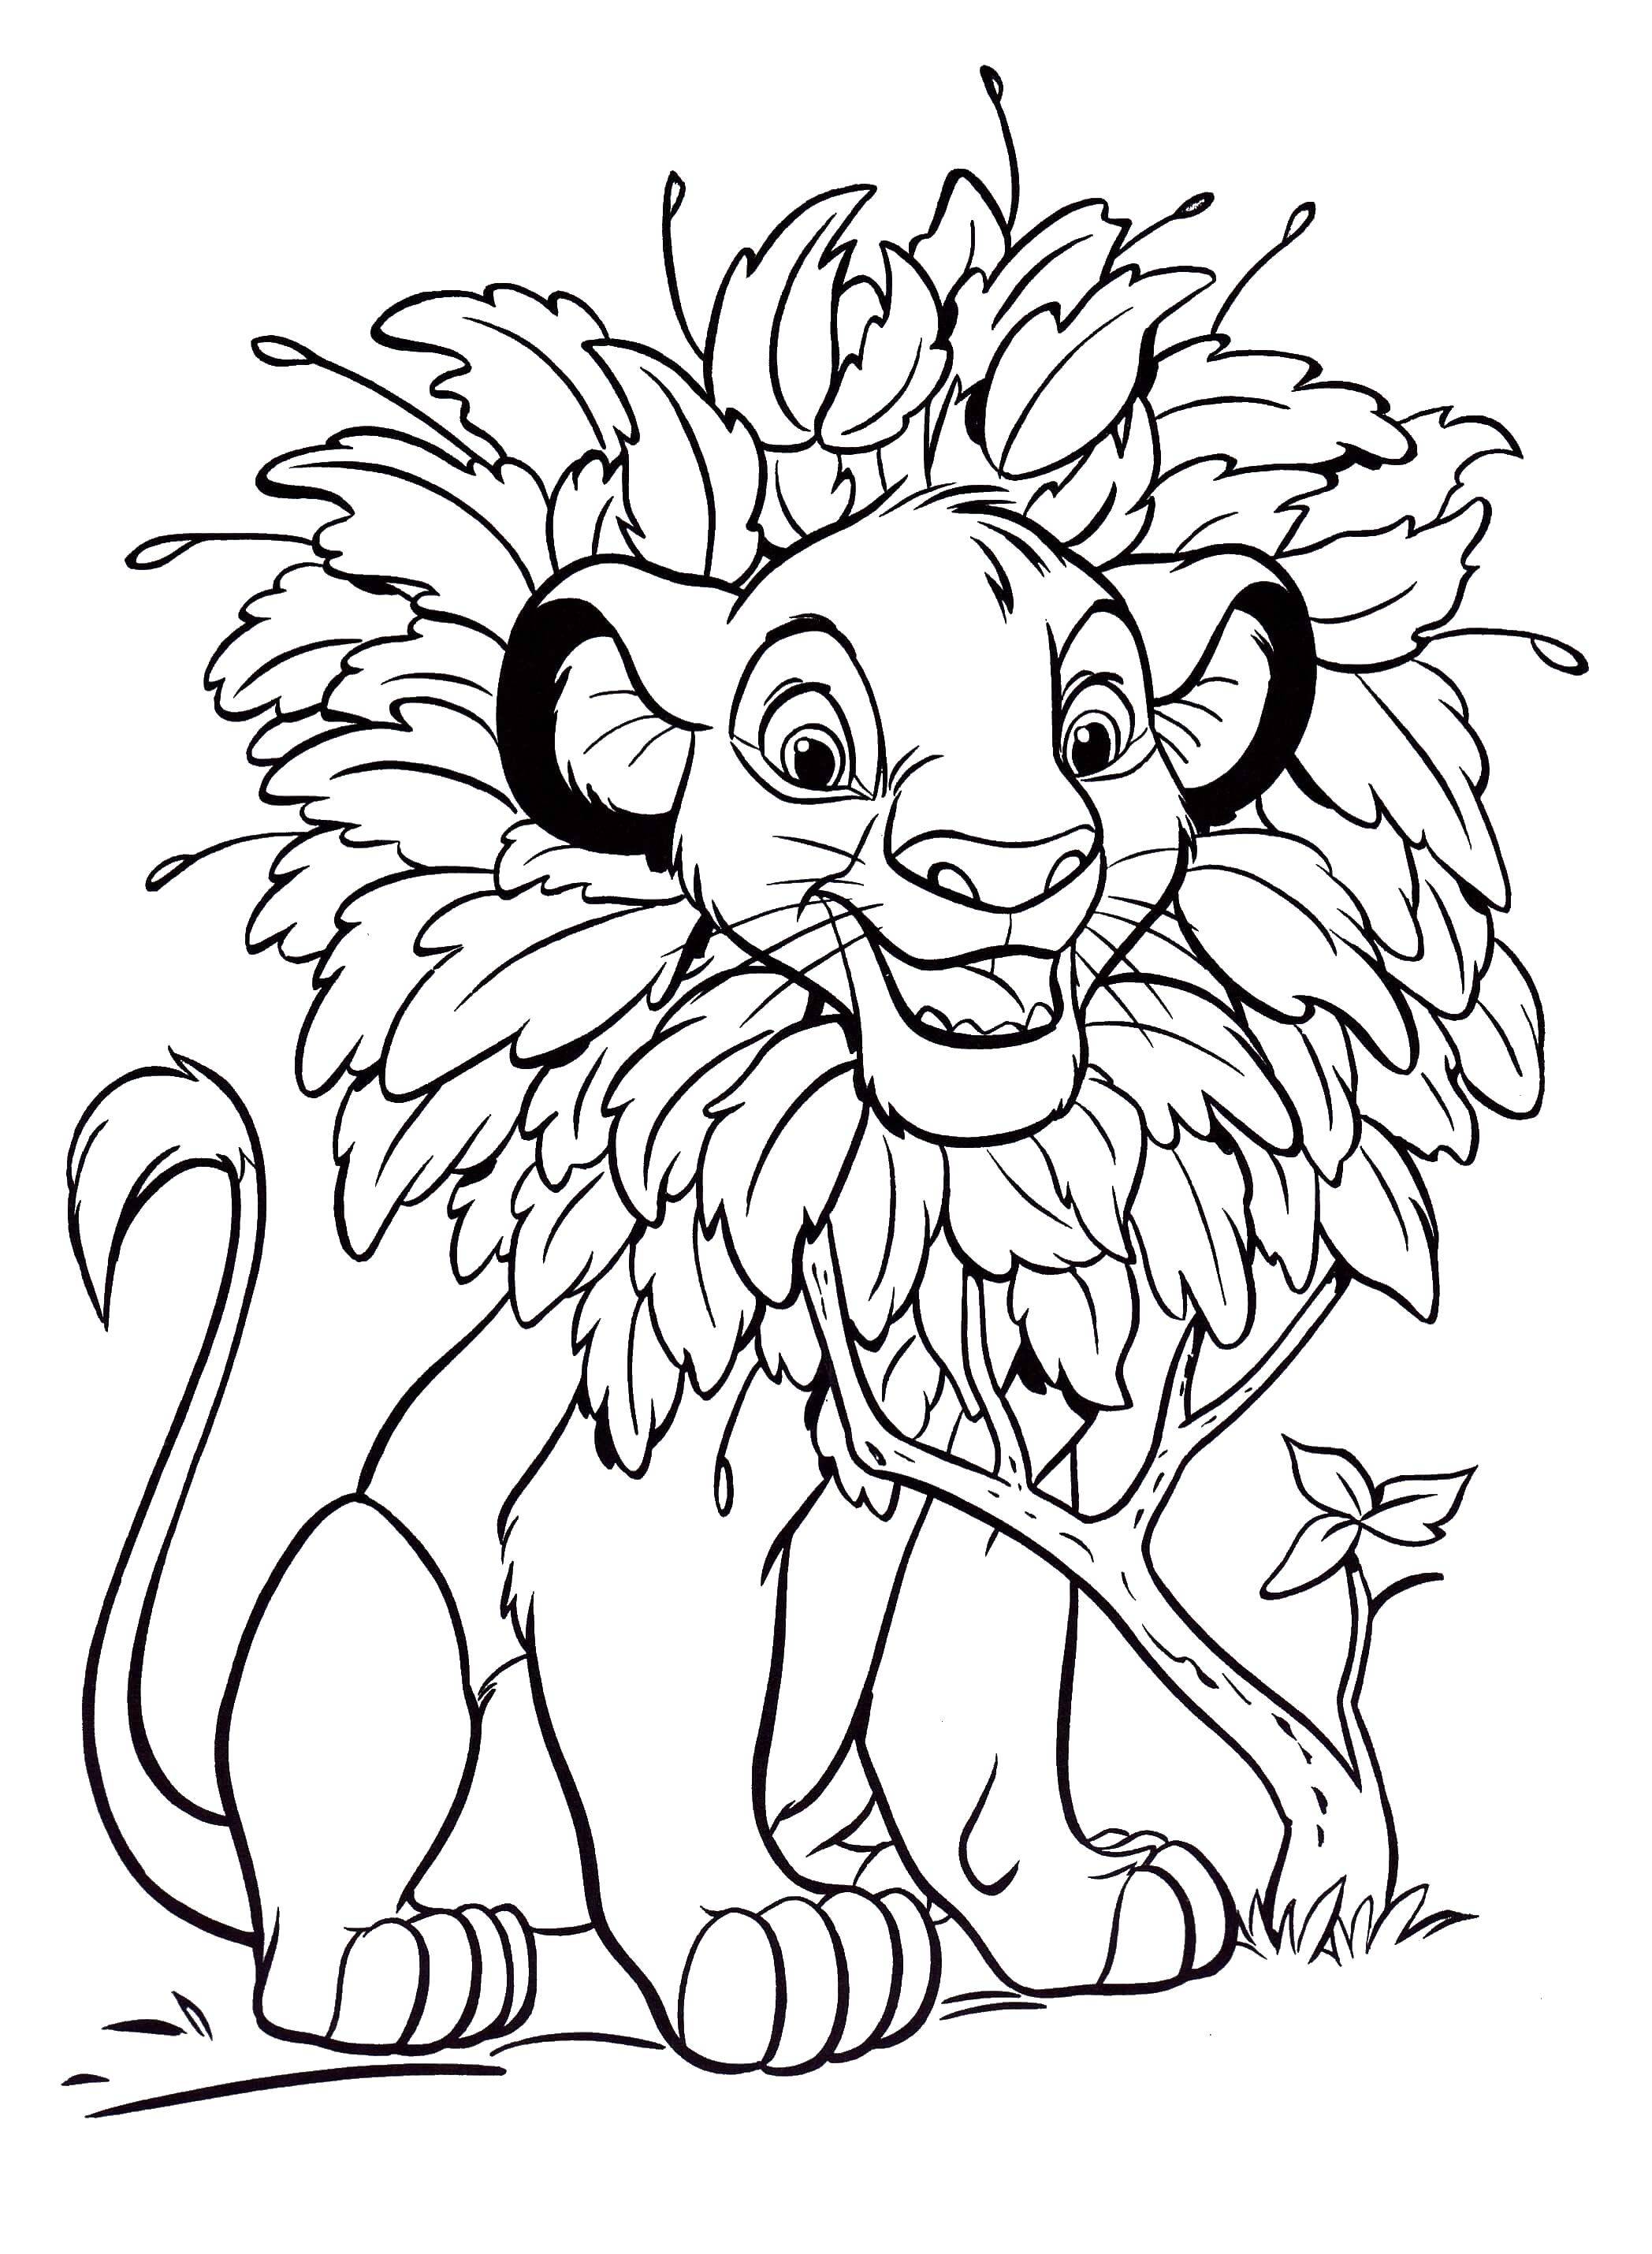 Coloring Lion. Category Animals. Tags:  Animals, lion.